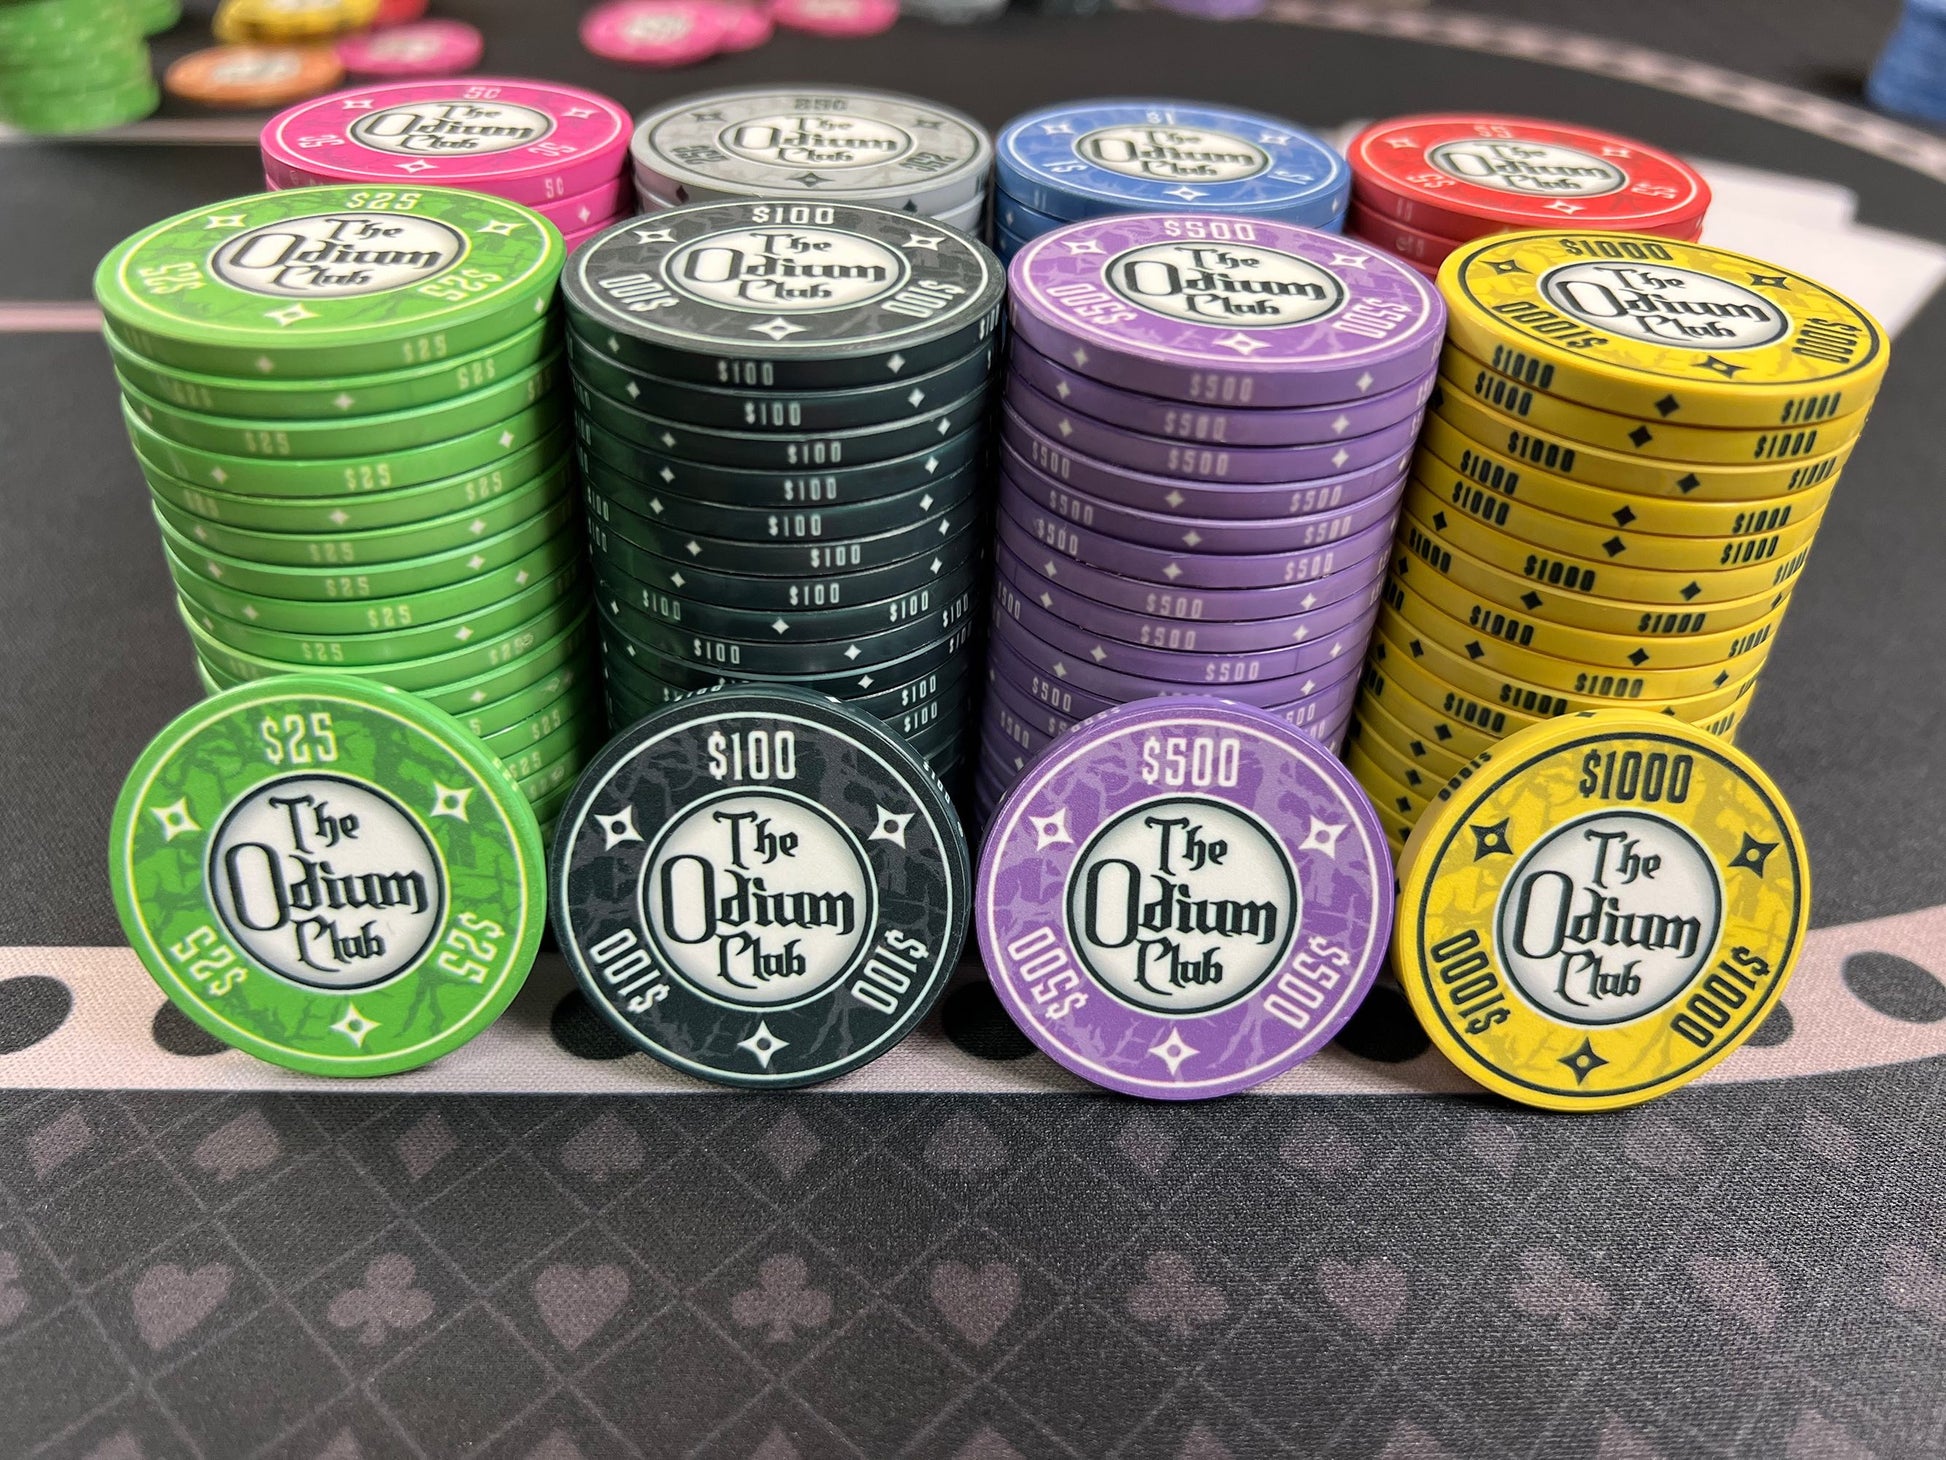 All eight of the stock colors and denominations of the modern-looking Odium Club poker chips in stacks of 20. Both faces are identical. Each side shows the logo and denom. Available in 5¢ pink, 25¢ gray, $1 blue, $5 red, $25 green, $100 black, $500 purple, and $1000 yellow. Shown up front: twenty-five dollar green, one-hundred dollar black, five-hundred dollar purple, and one thousand dollar yellow.